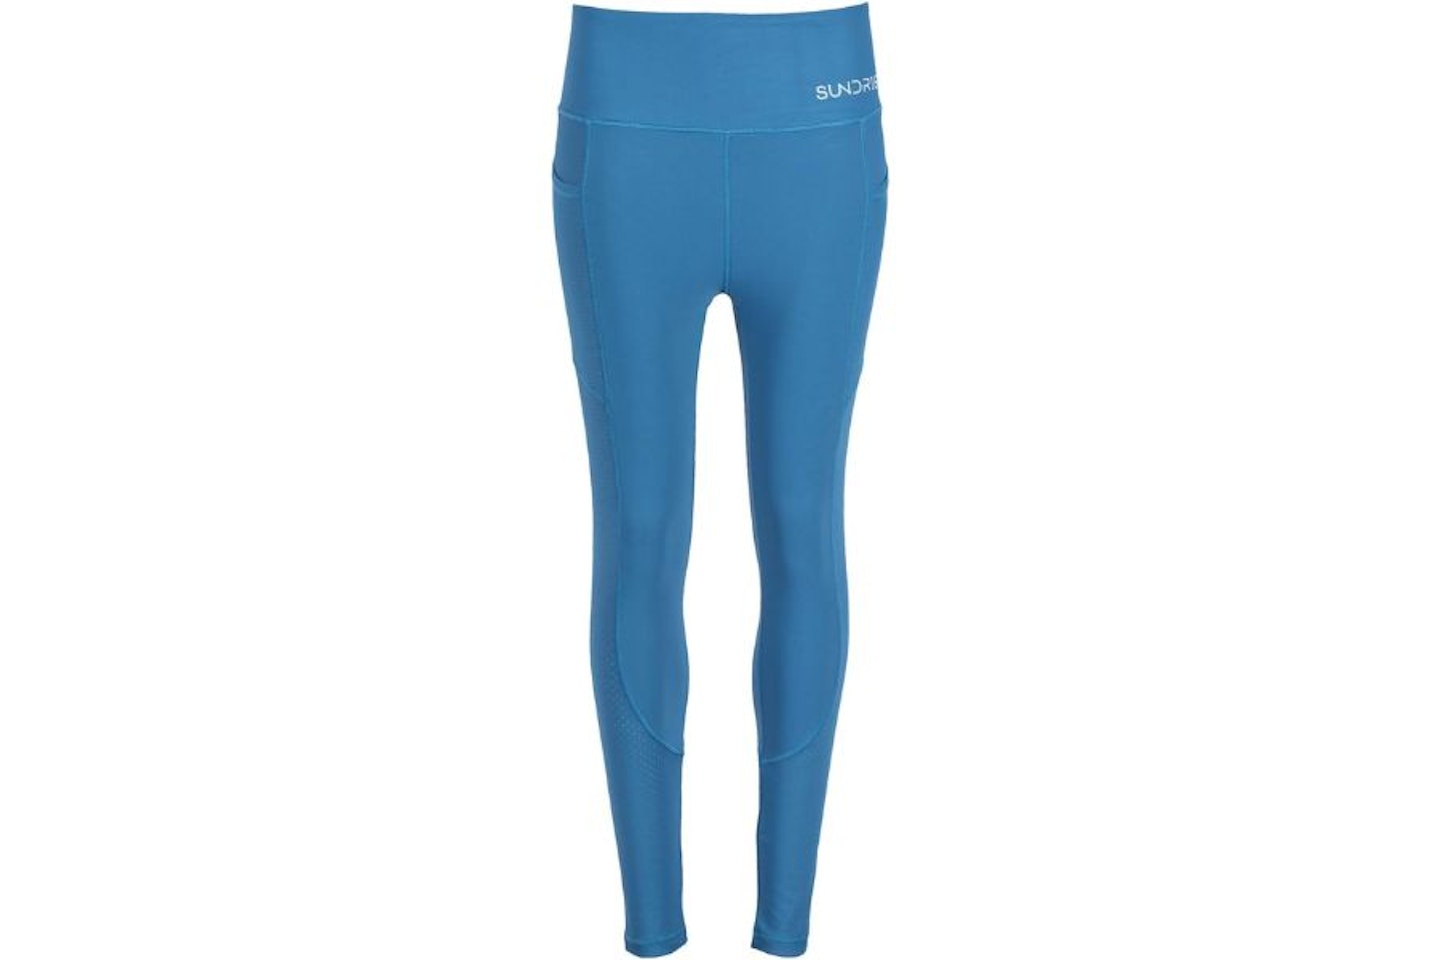 Sundried Women's Running Tights With Pockets